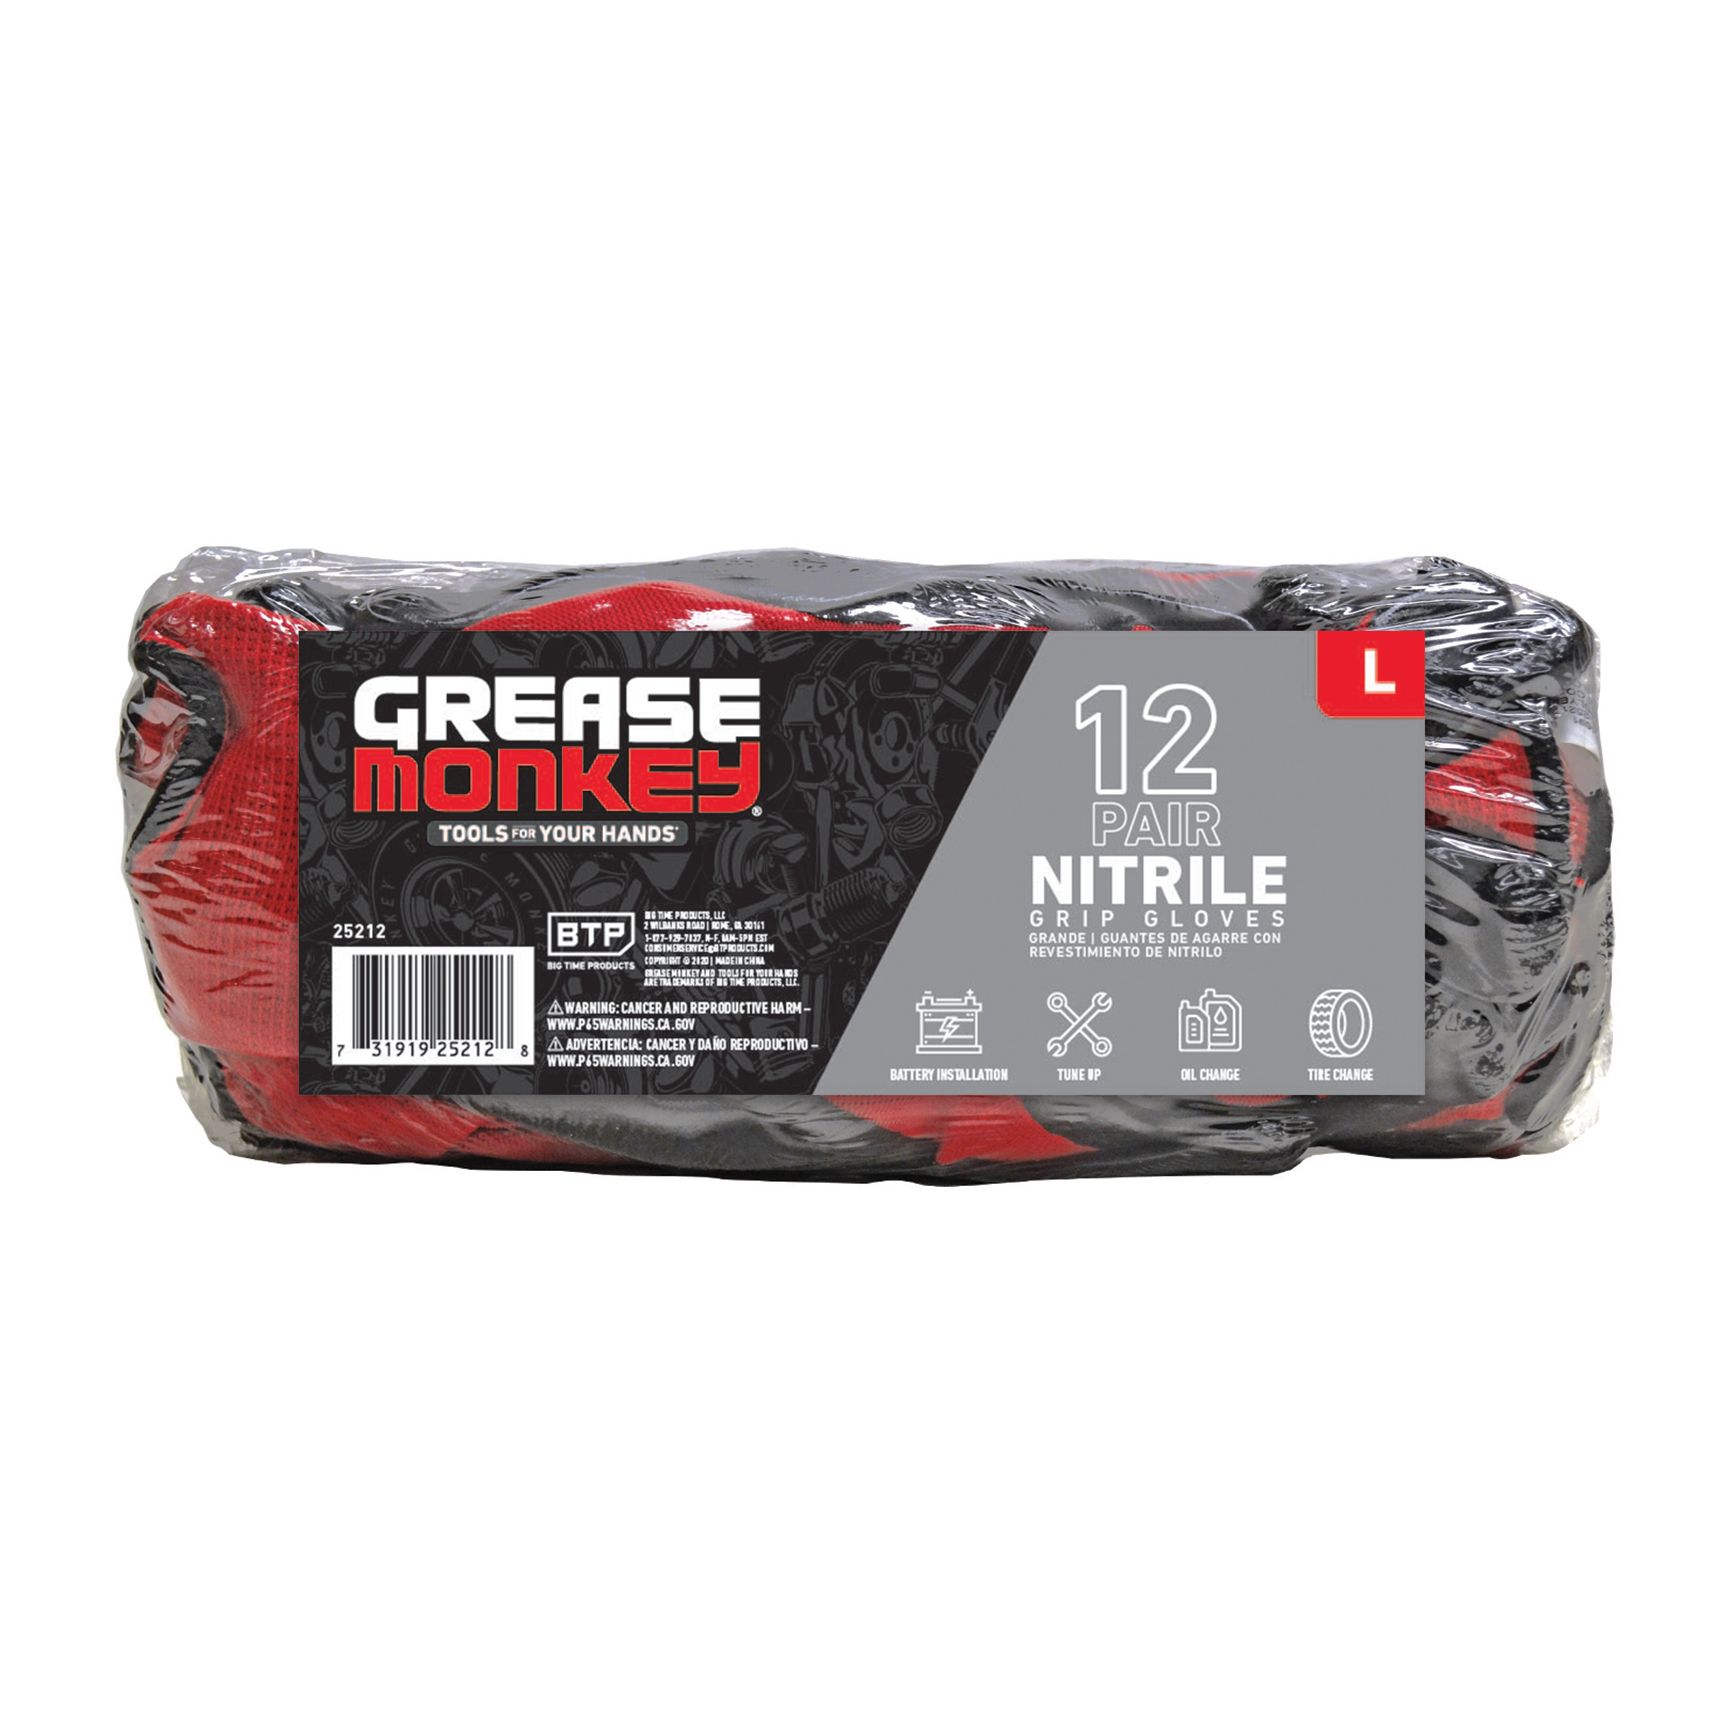 Grease Monkey Nitrile Disposable Gloves (100-Pack) - Size Large